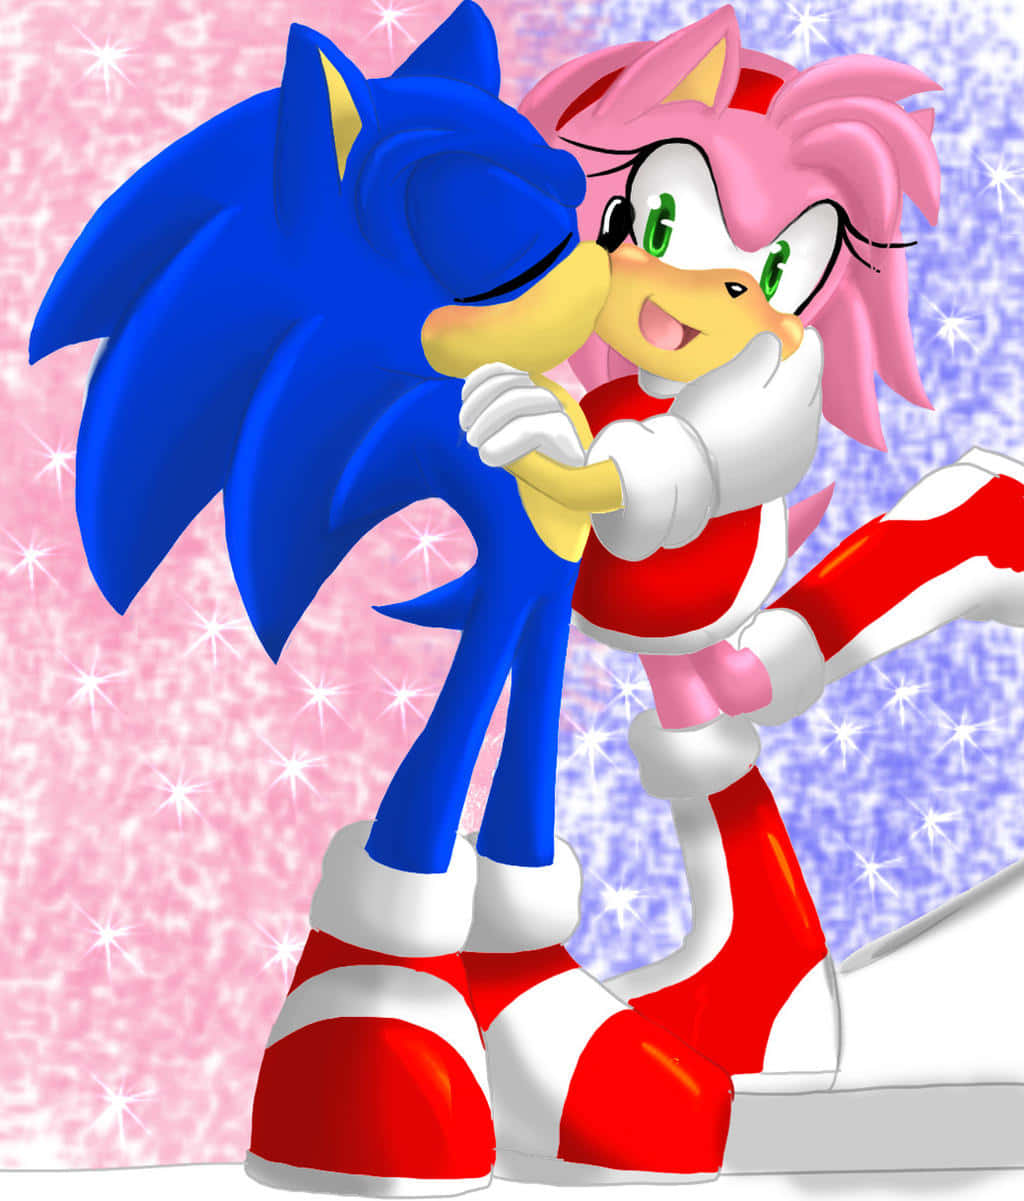 "Sonic and Amy Share a Moment" Wallpaper